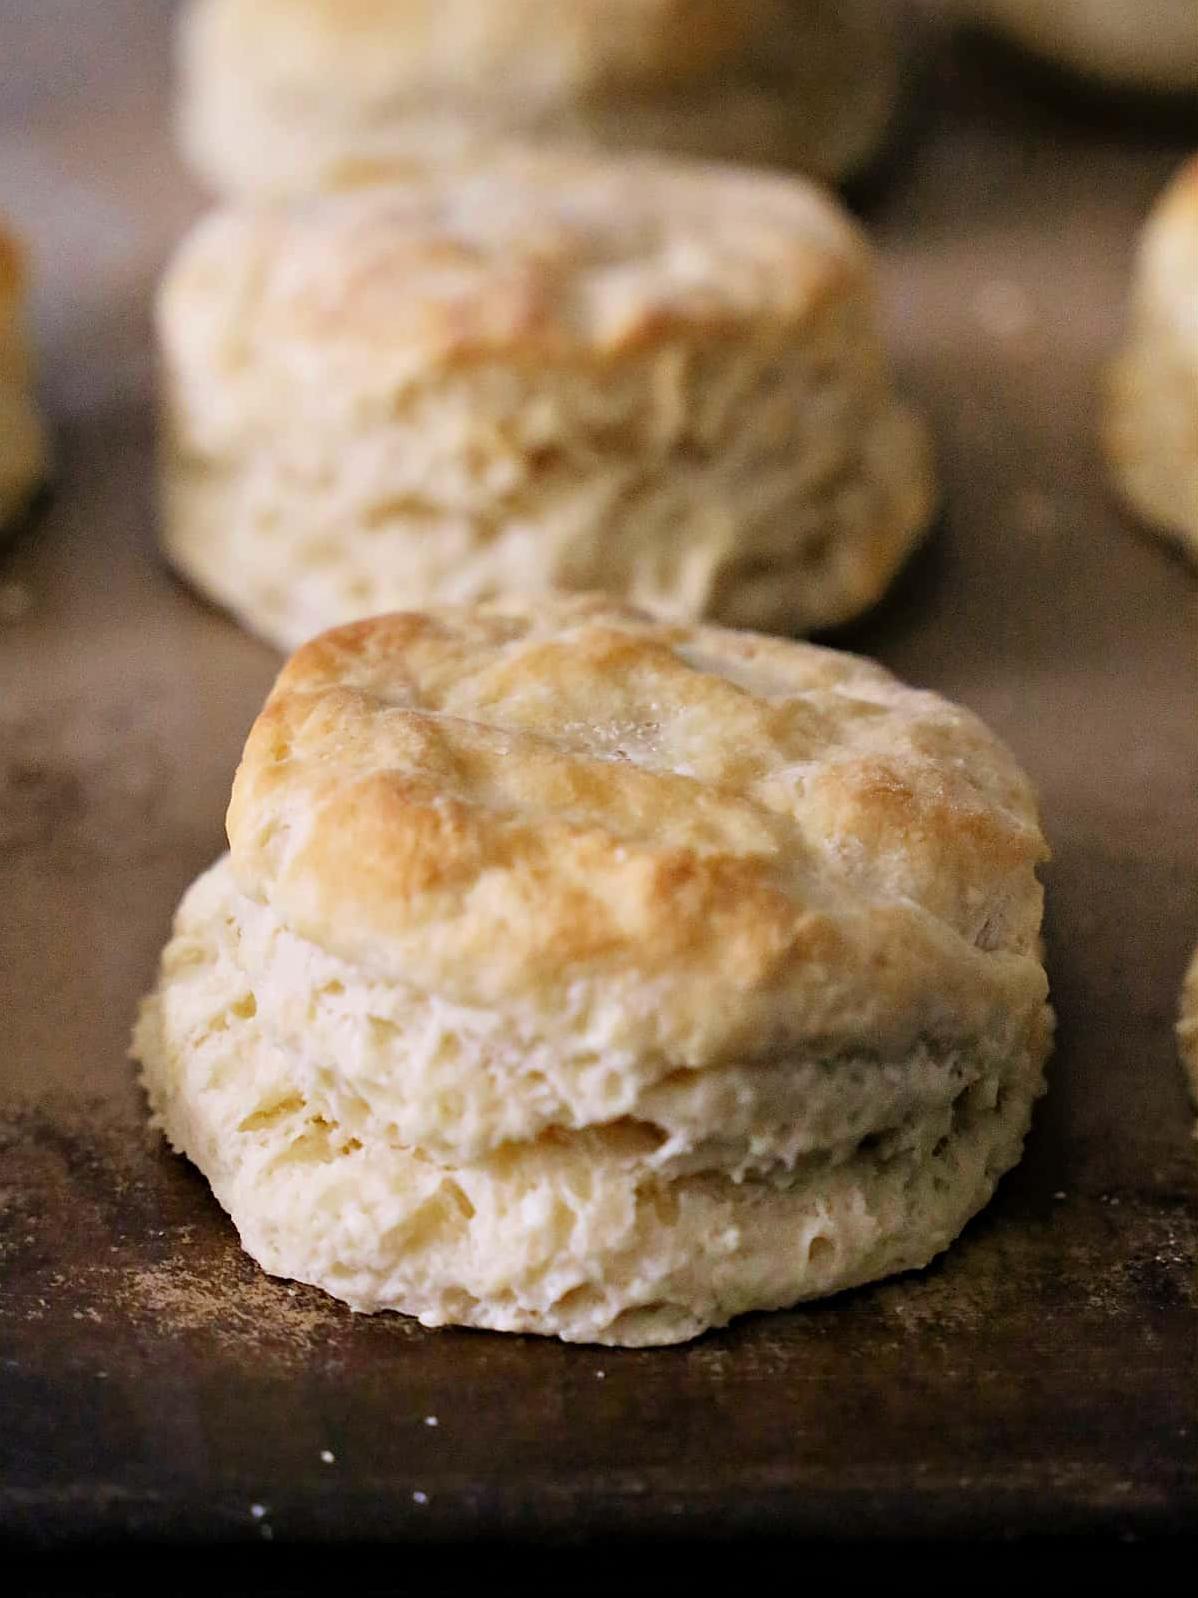  Behold, the epitome of Southern comfort food - traditional biscuits!